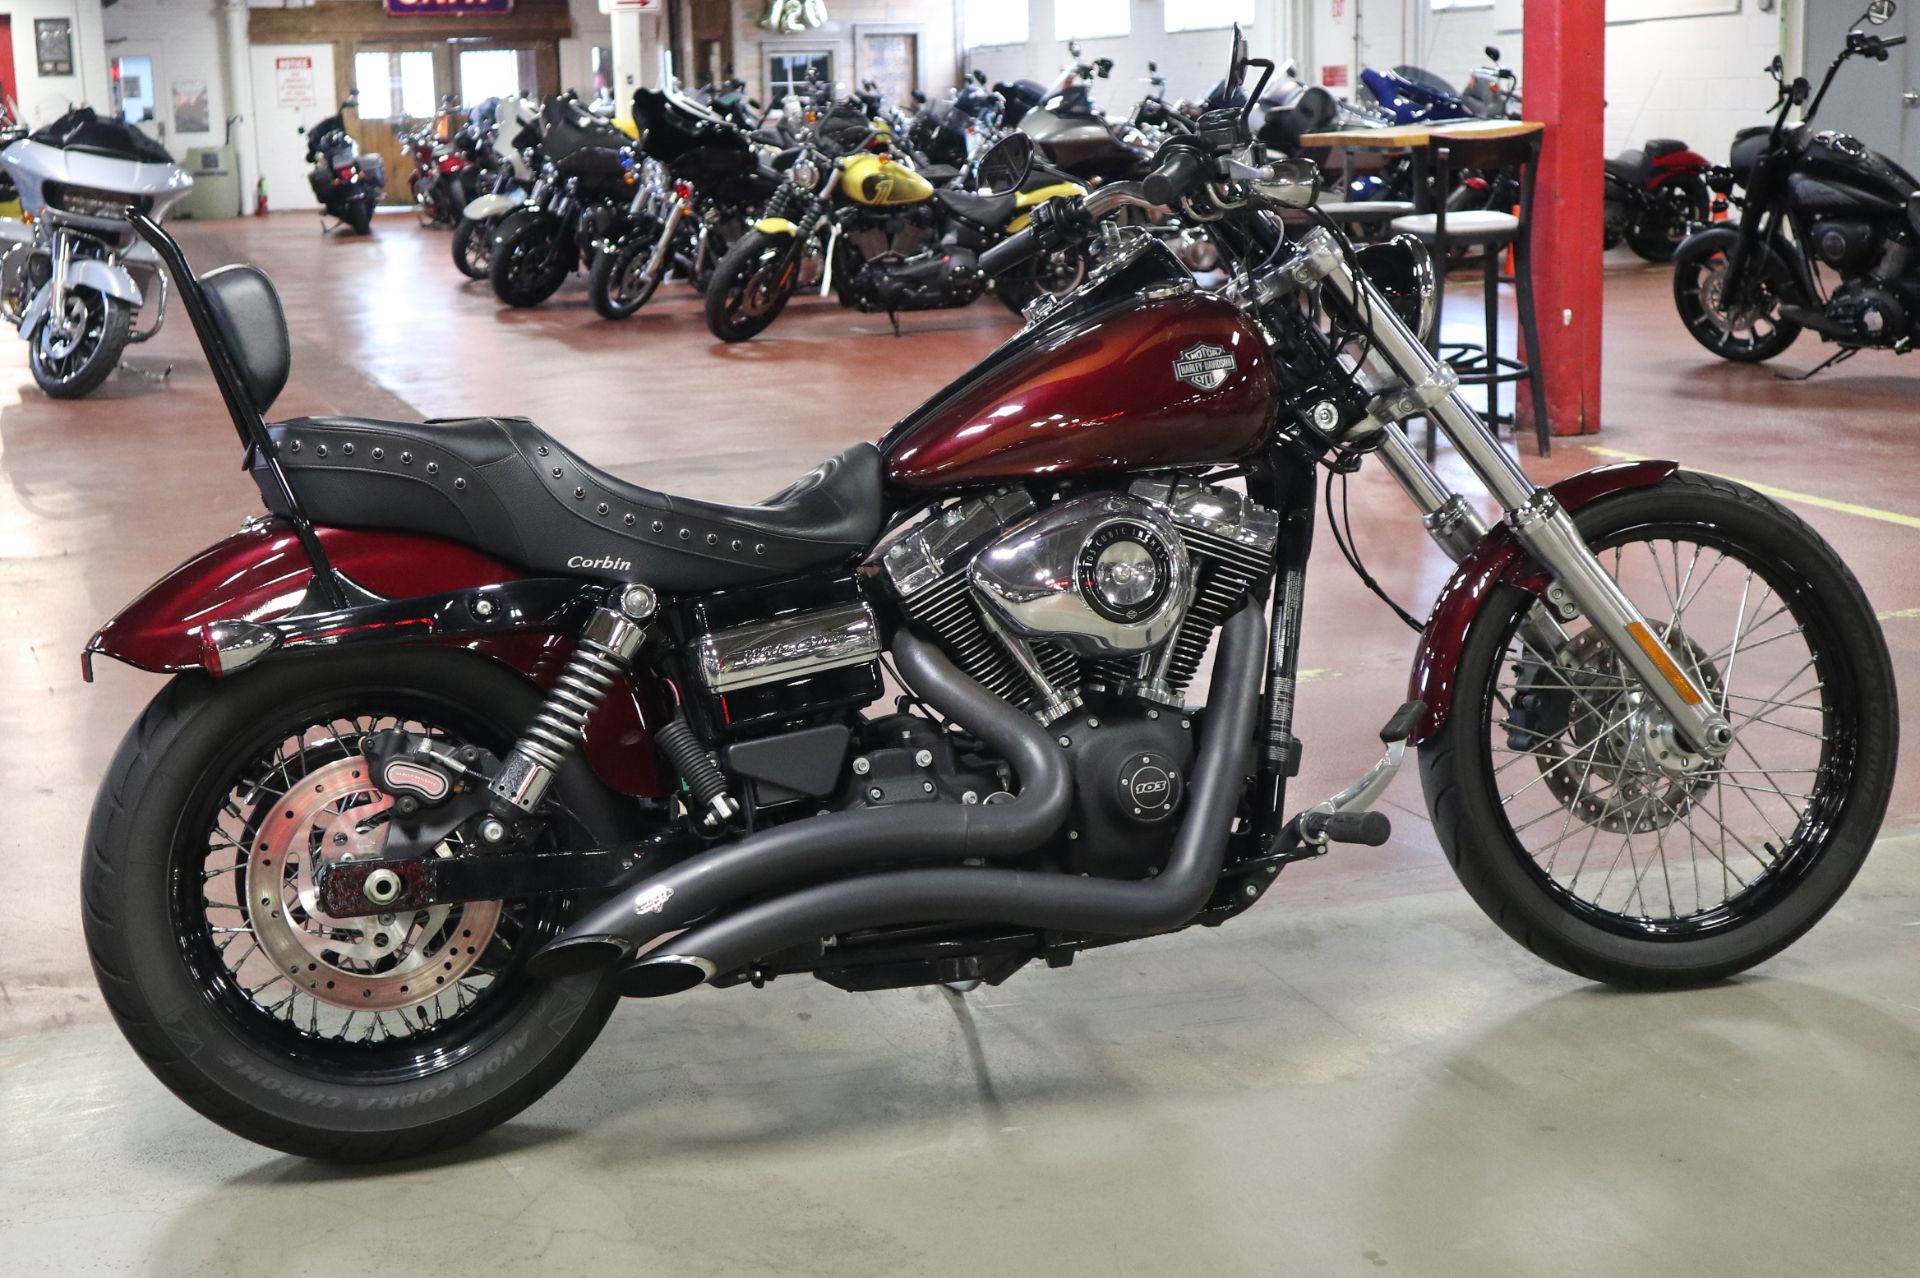 2015 Harley-Davidson Wide Glide® in New London, Connecticut - Photo 8